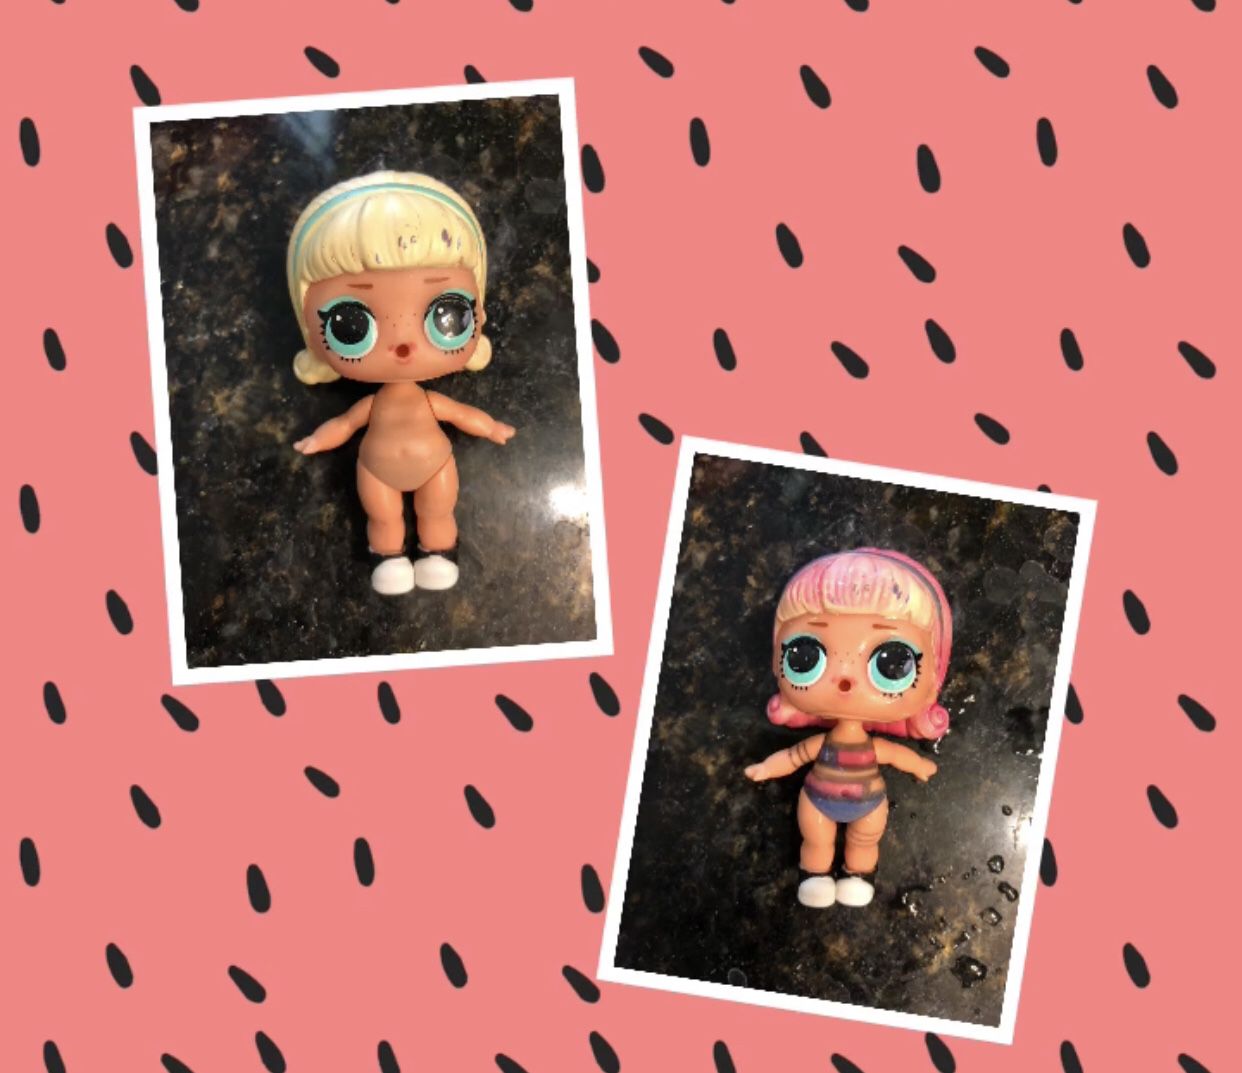 lol surprise dolls(one of doll changes her color)